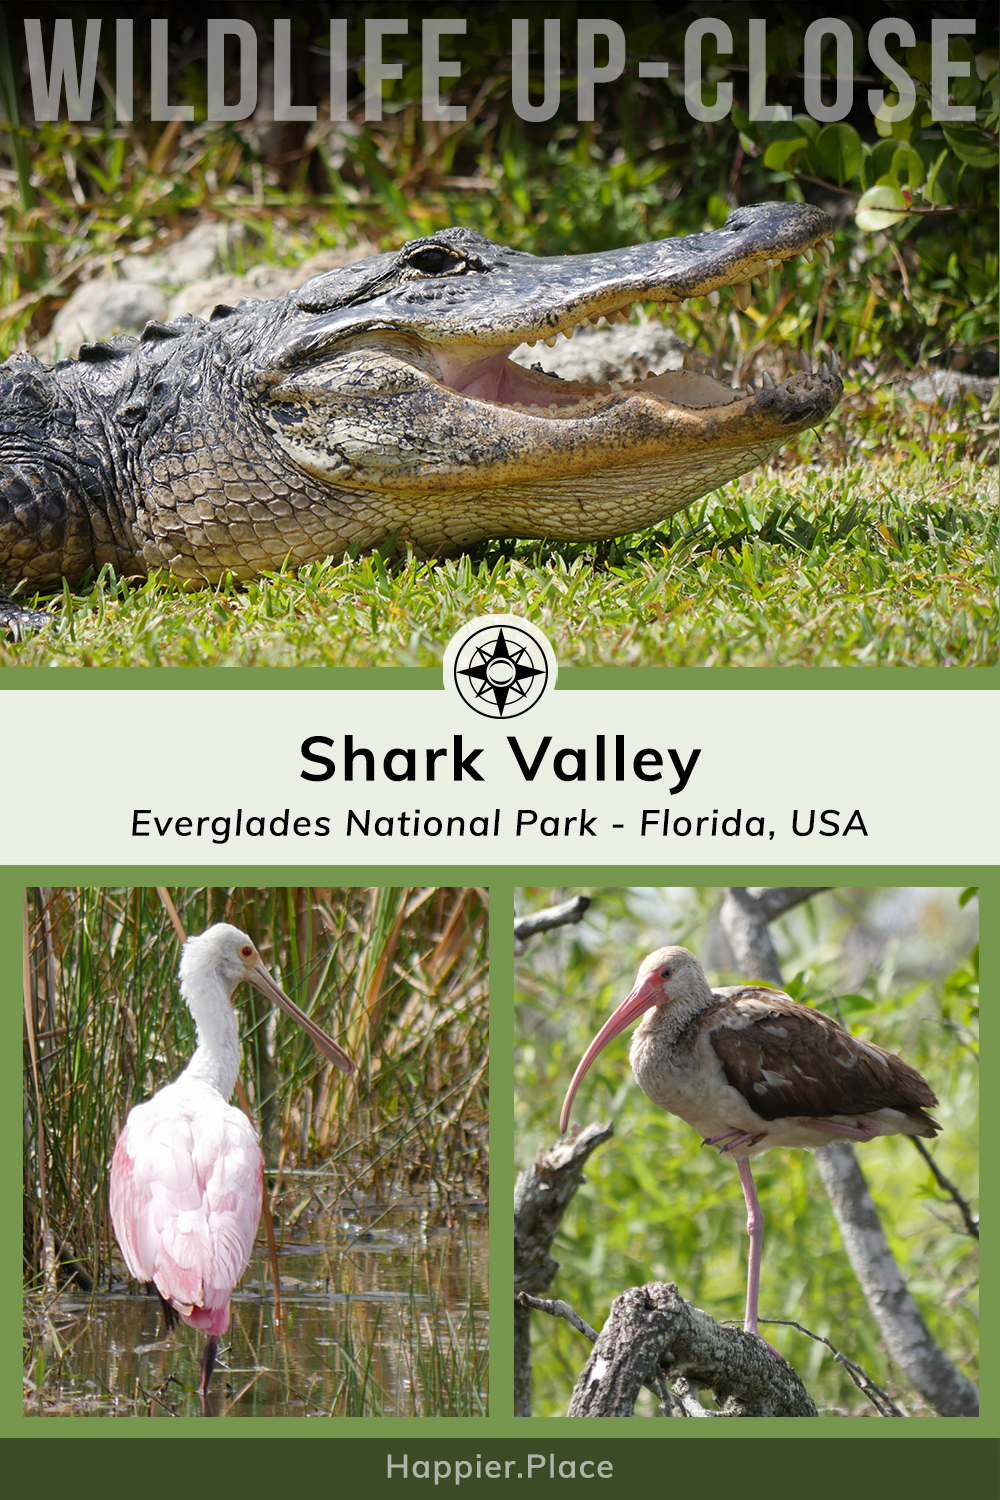 Wildlife up-close, alligator, pink roseate spoonbill, brown juvenile white ibis, Shark Valley, Everglades National Park, Florida, USA, Happier Place